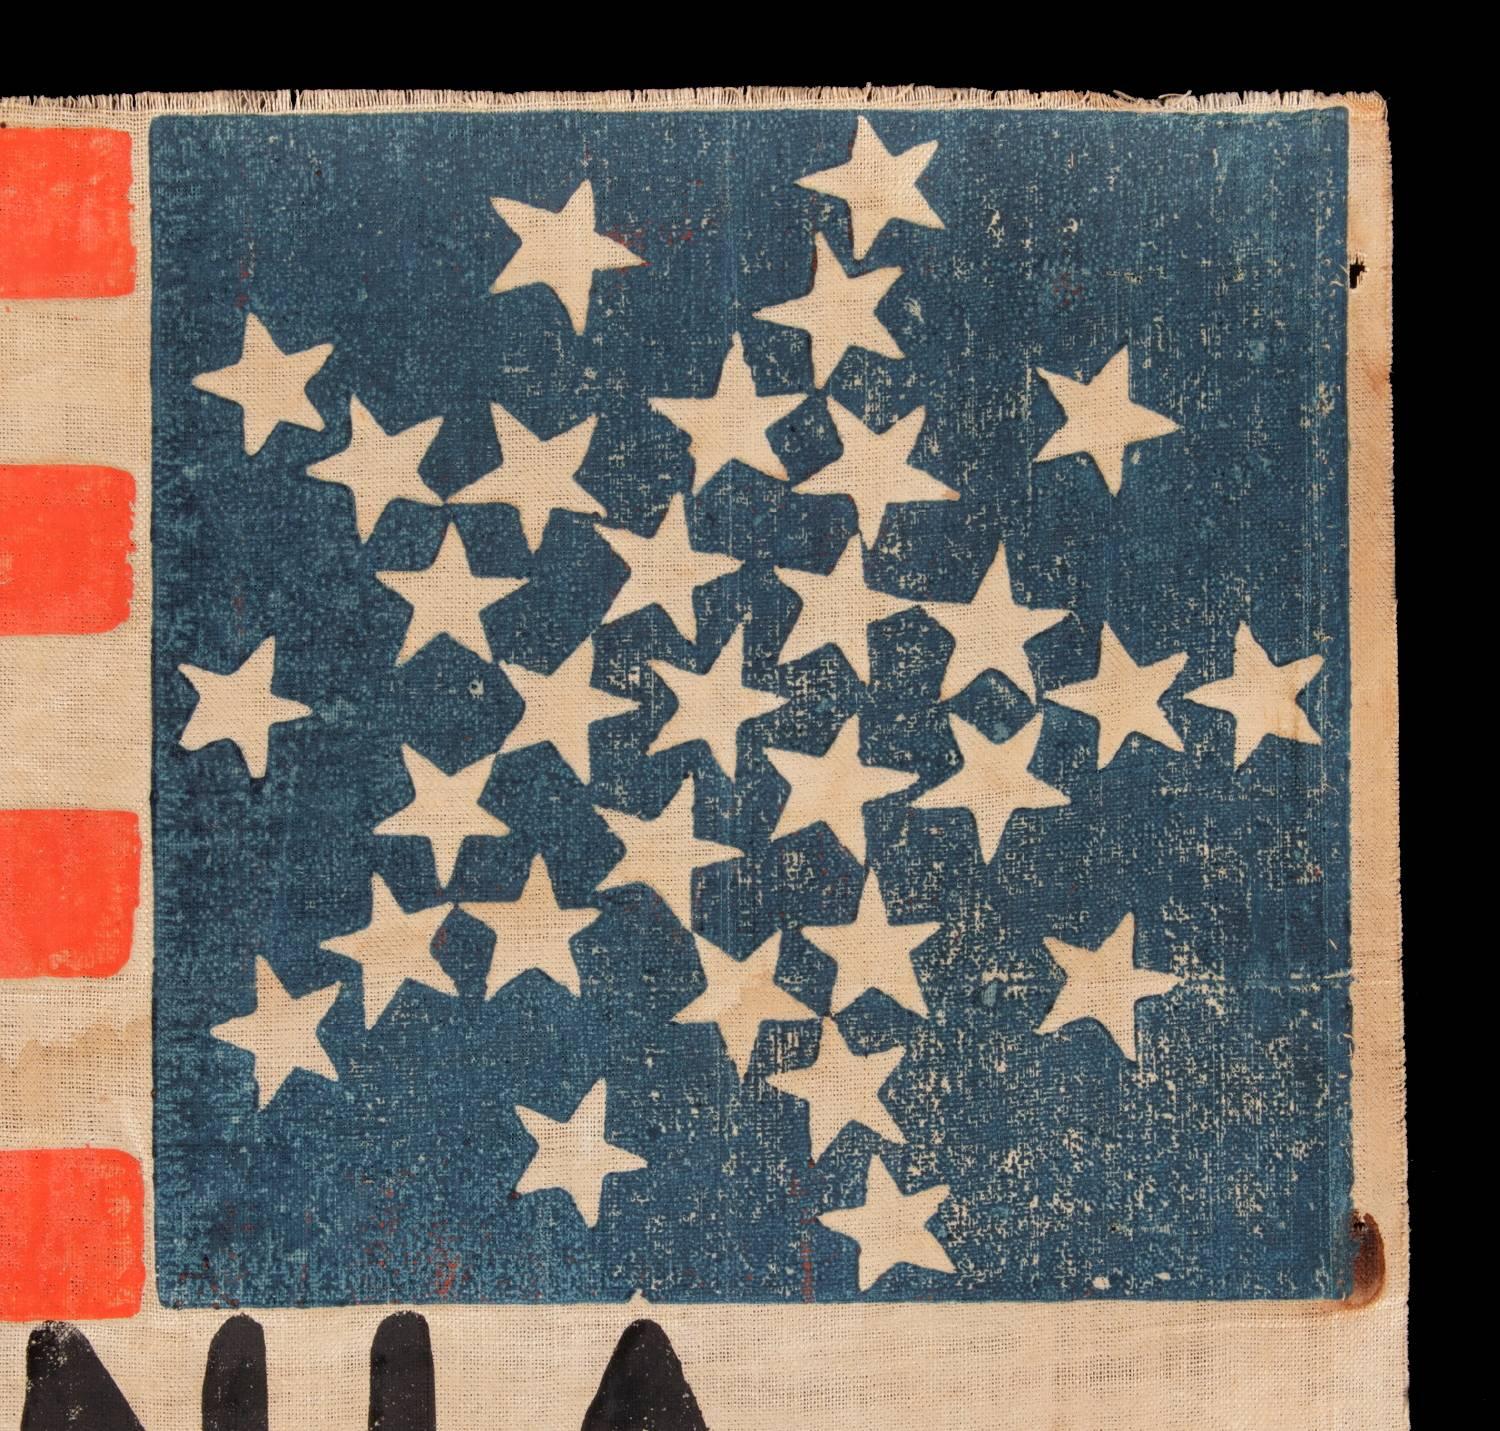 American 31 Stars Arranged in a Rare Variation of the 